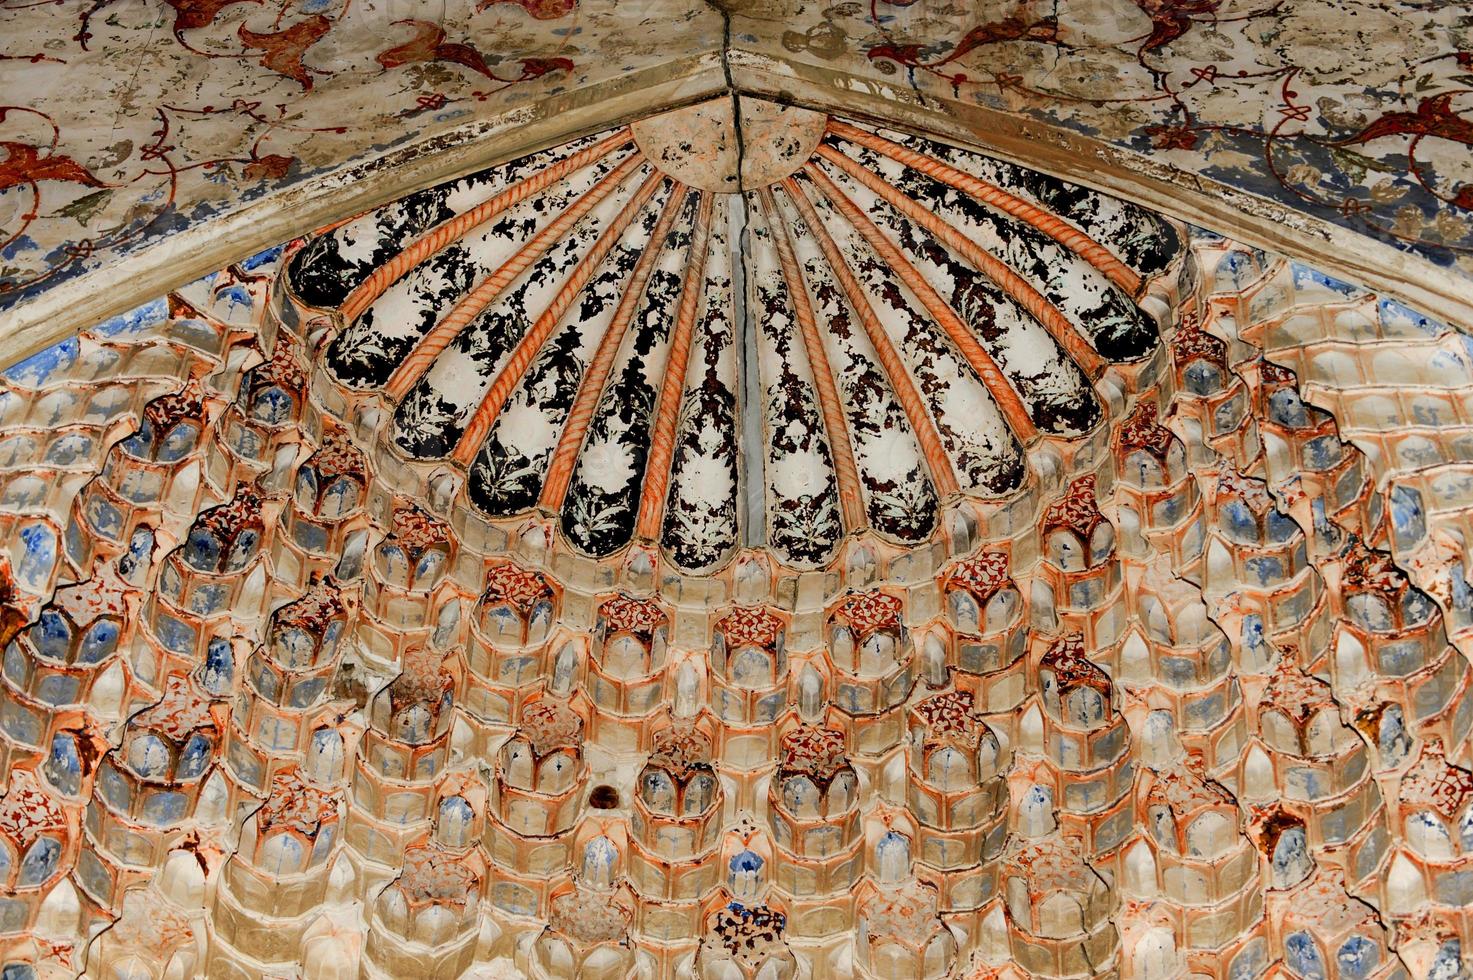 Elements of ancient architecture of Central Asia. Ceiling in the form of a dome in a traditional ancient Asian mosaic photo